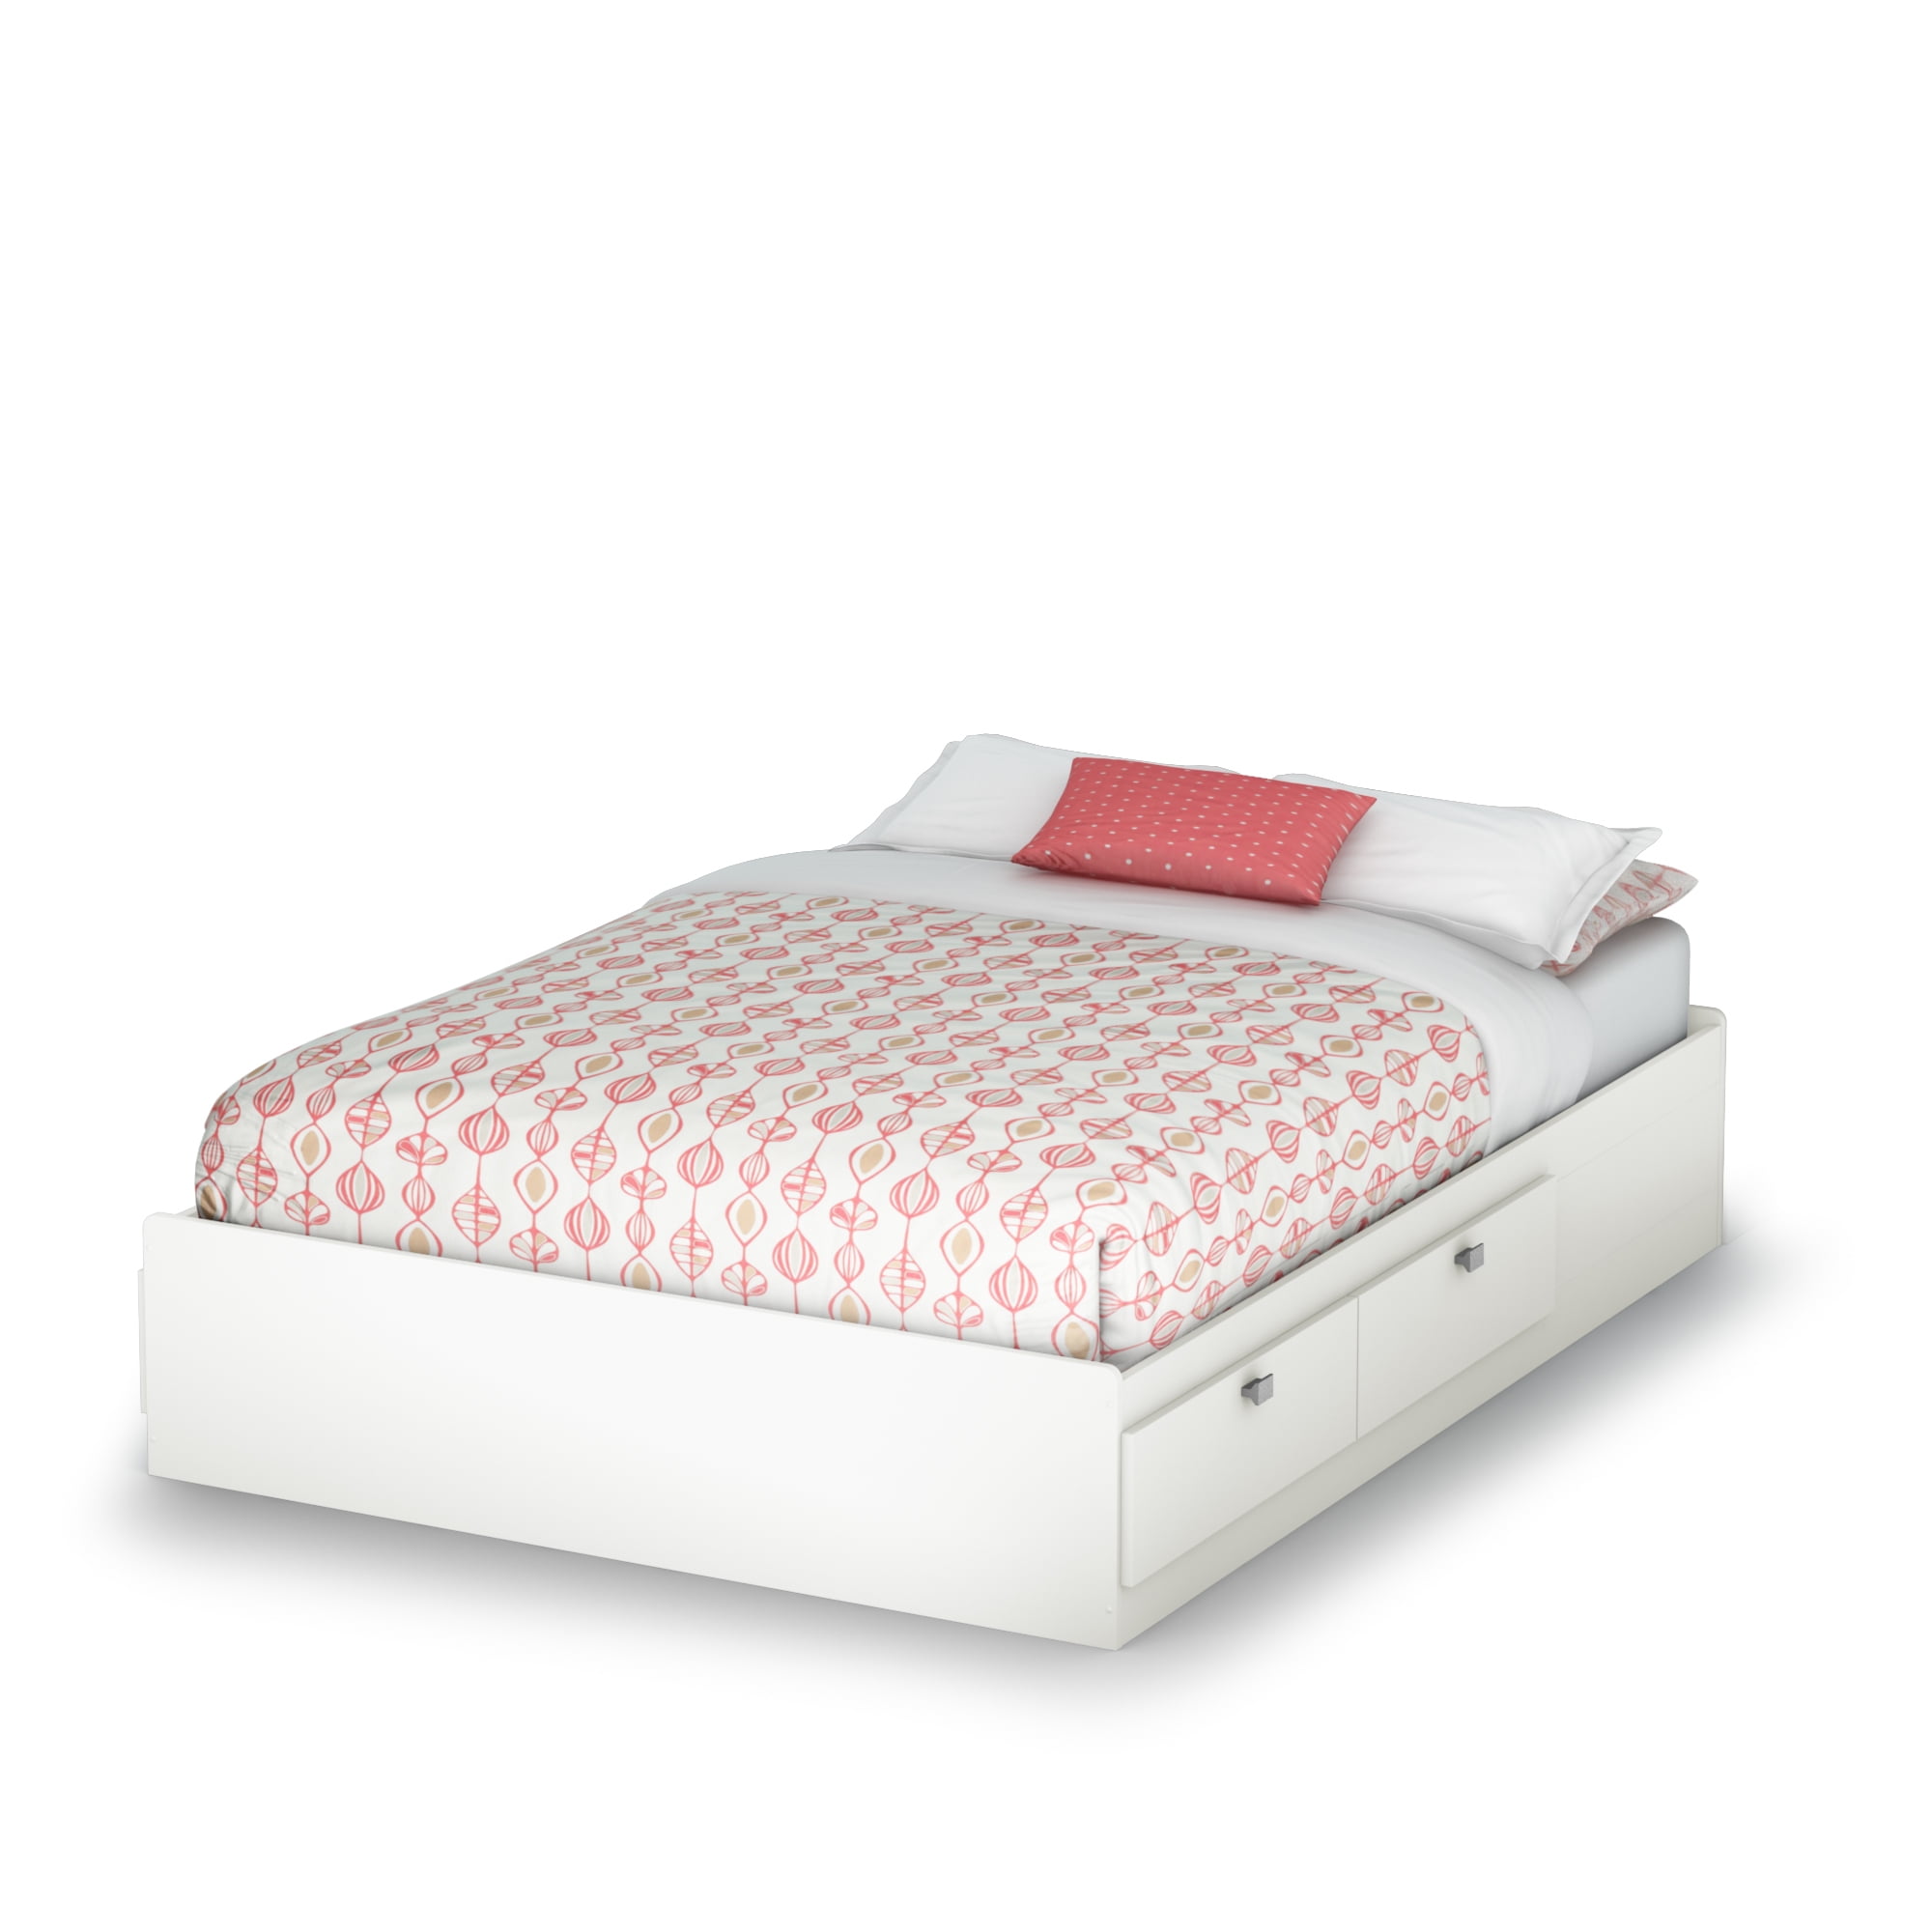 South S Spark 4 Drawer Storage Bed, White Bed Frame With Drawers